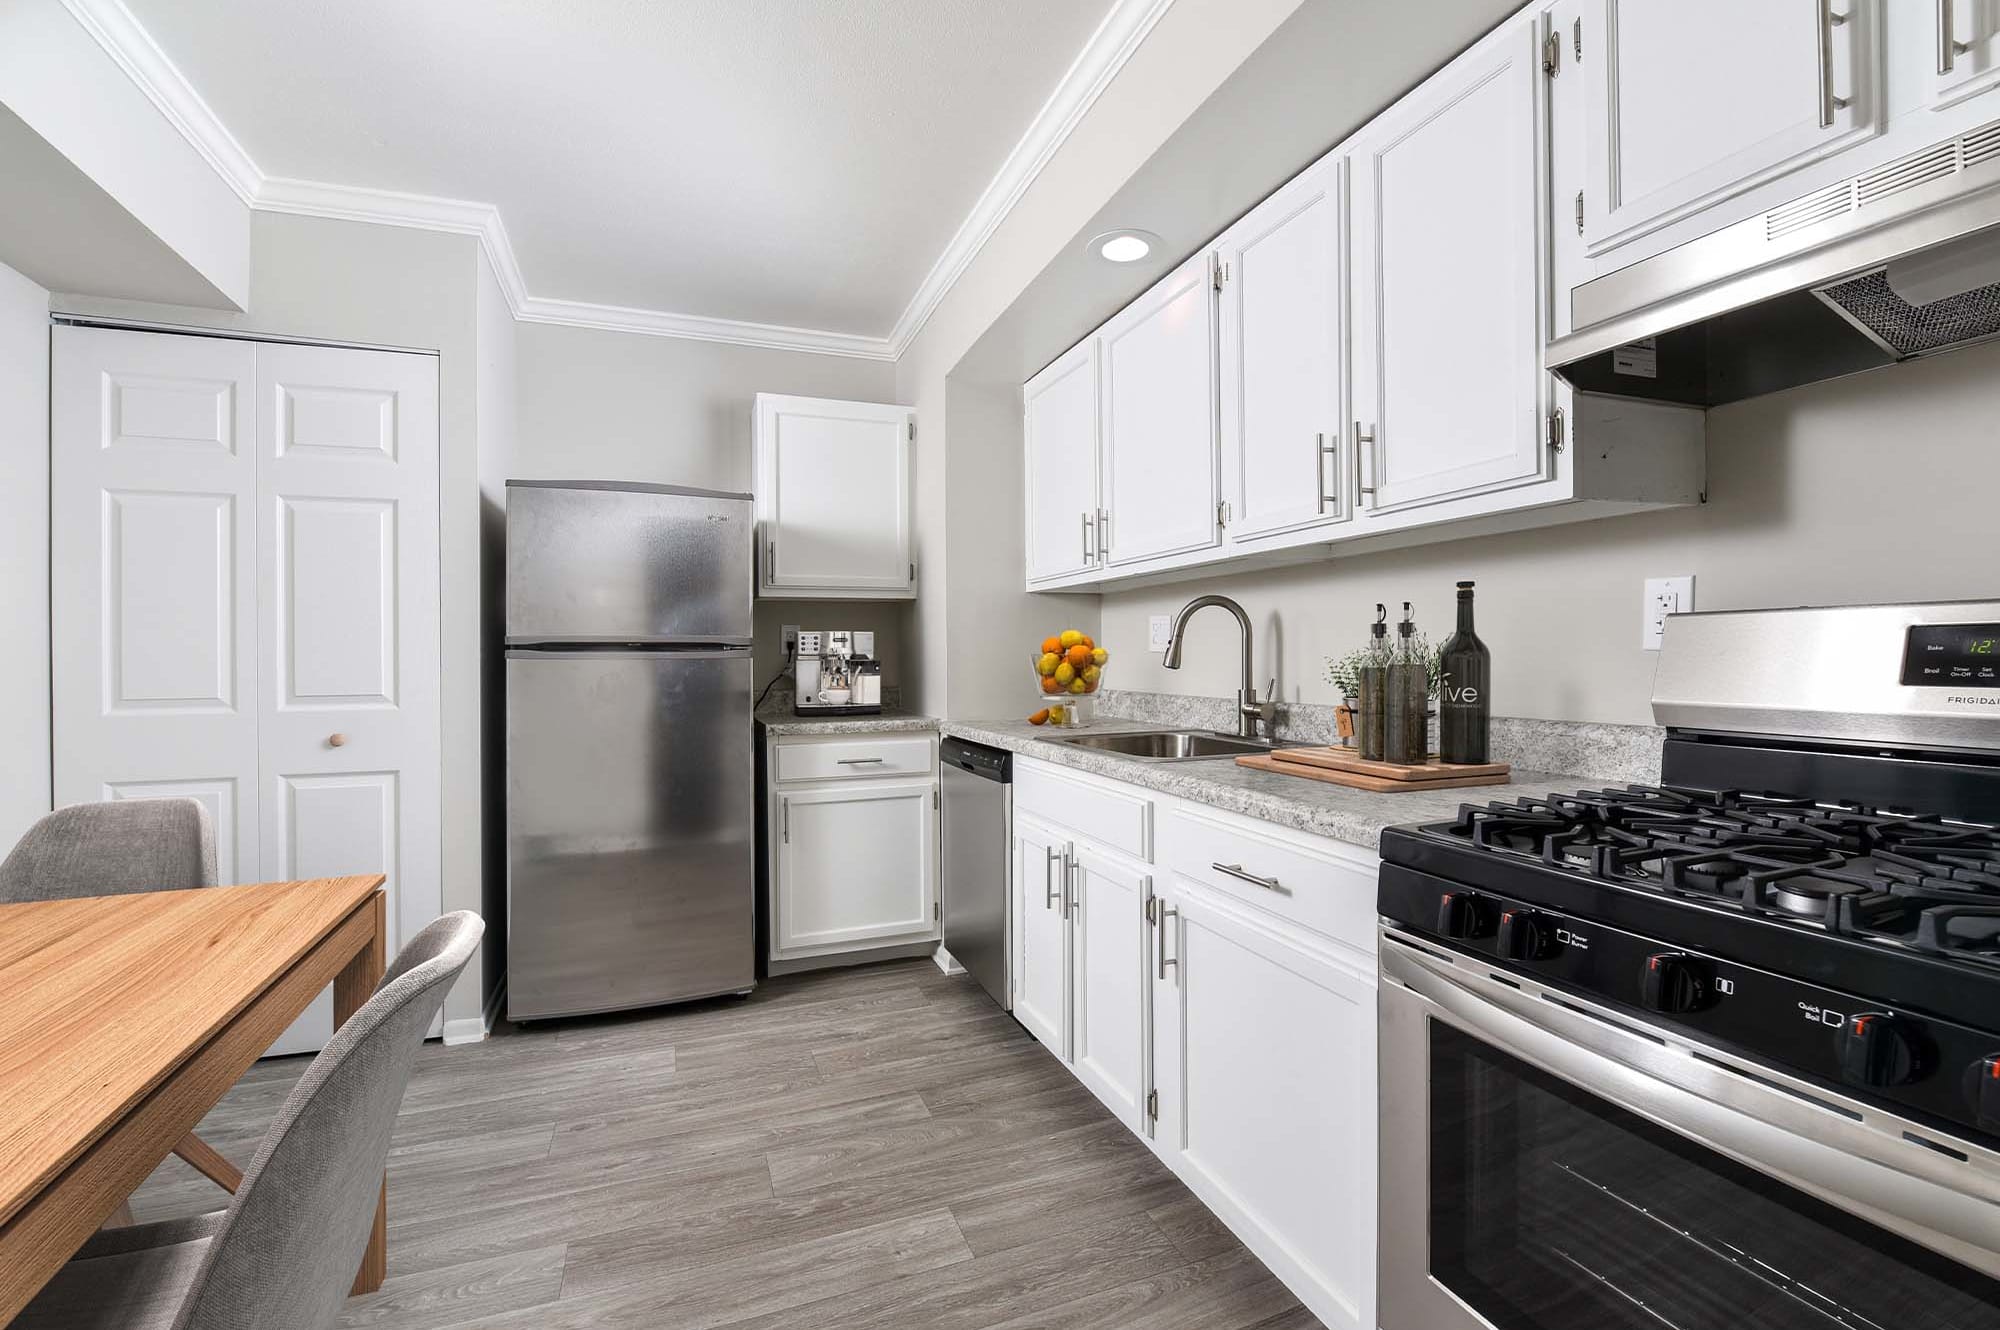 Model kitchen with white cabinets at The Nolan, Morrisville, Pennsylvania